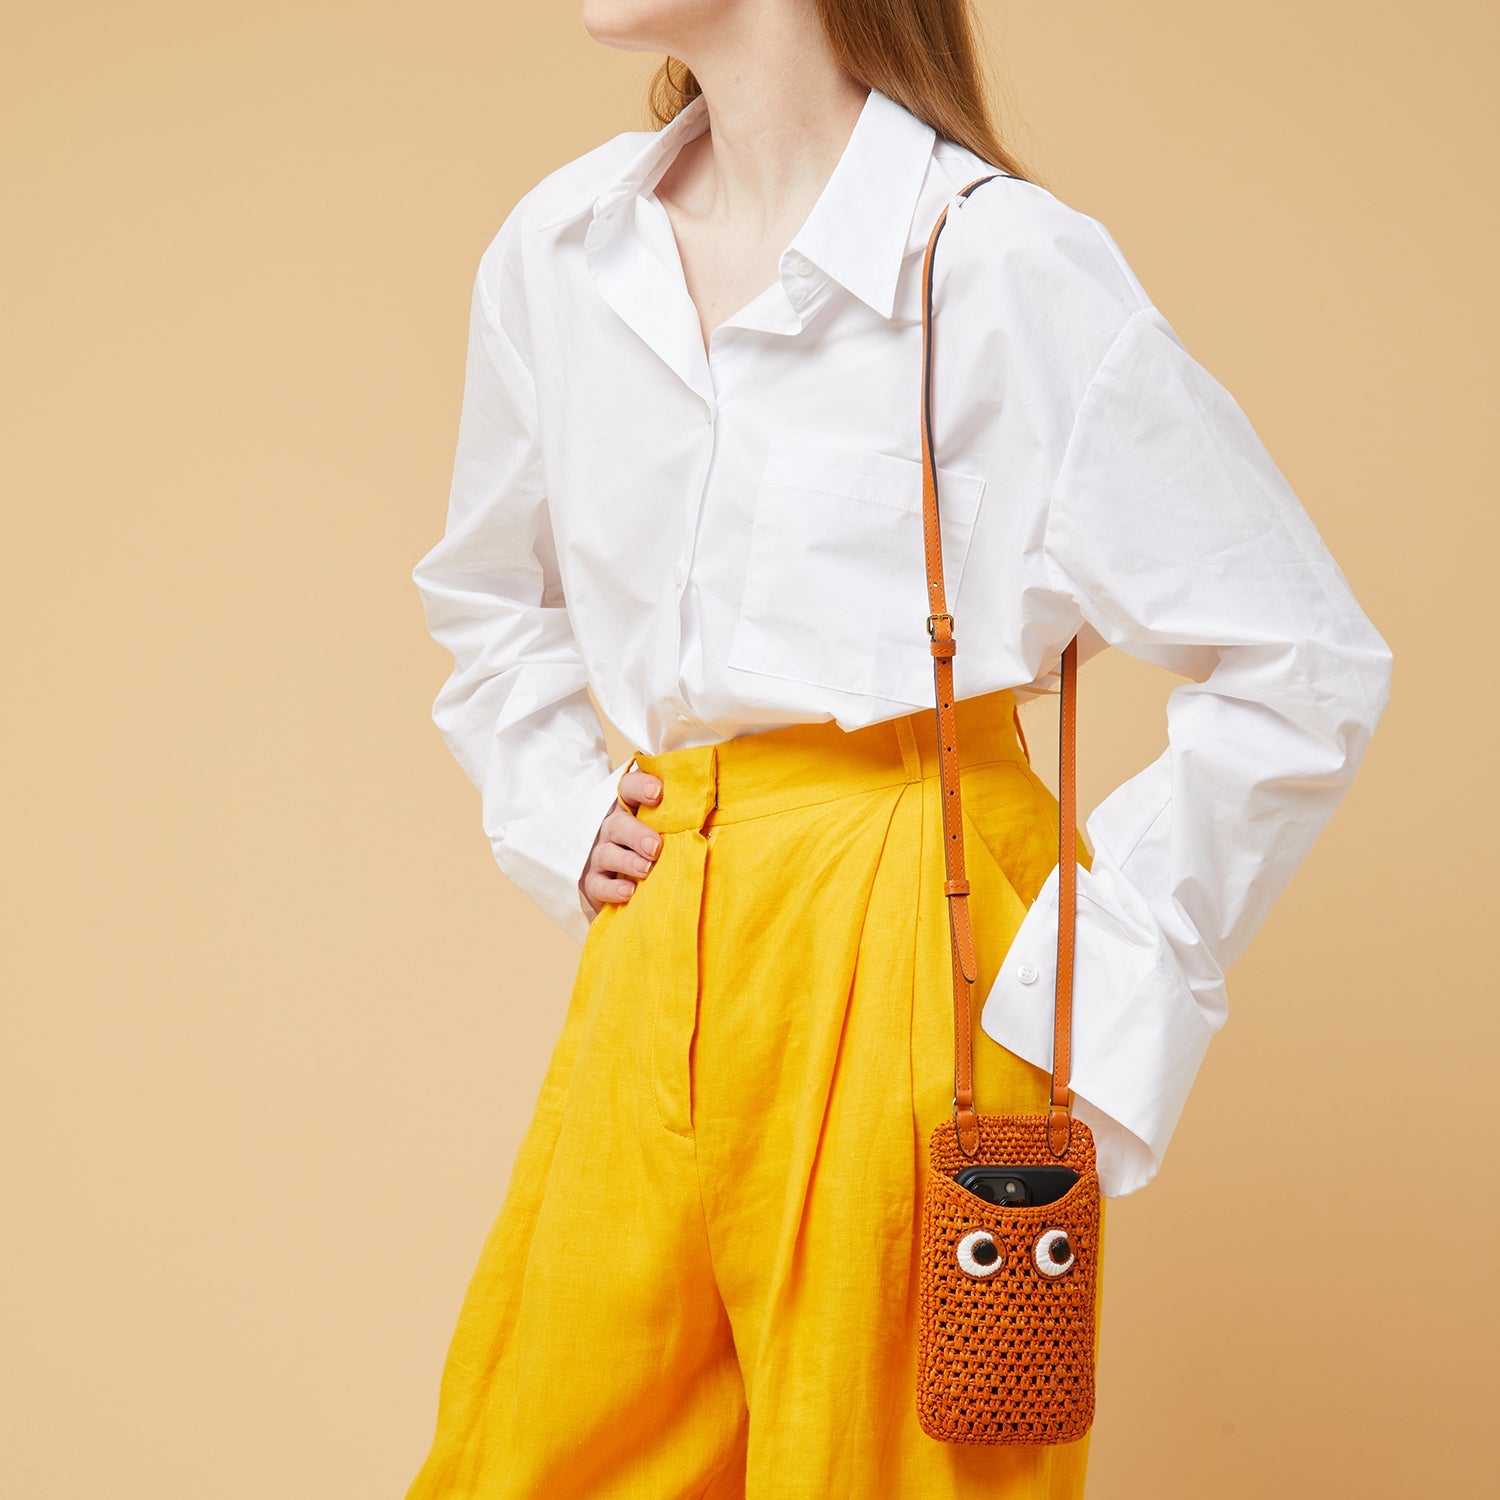 Eyes Phone Pouch on Strap -

                  
                    Raffia in Clementine -
                  

                  Anya Hindmarch US
